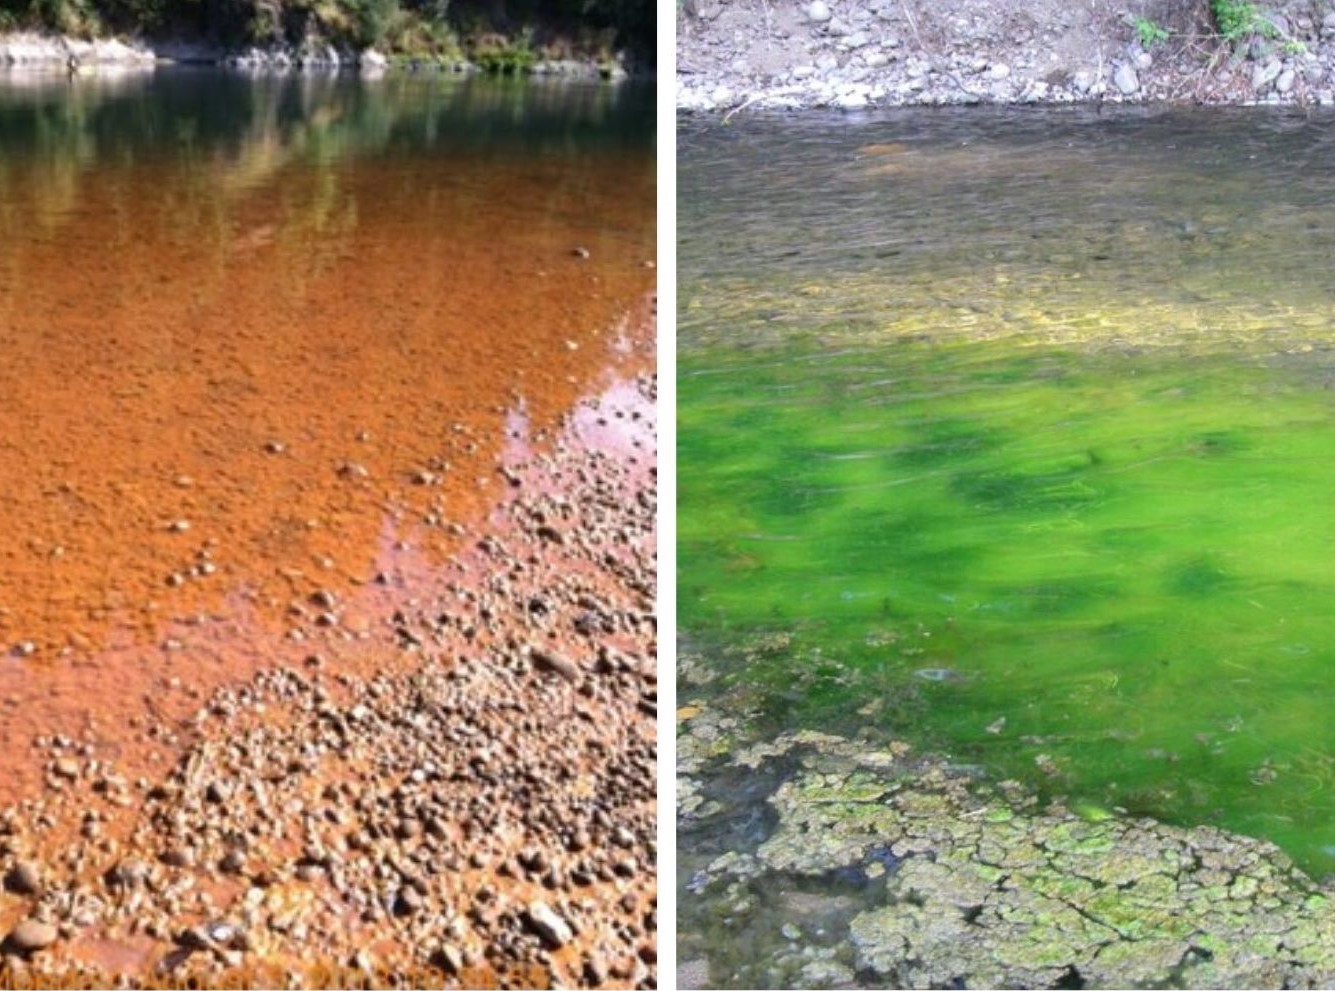 Red and green algae blooms